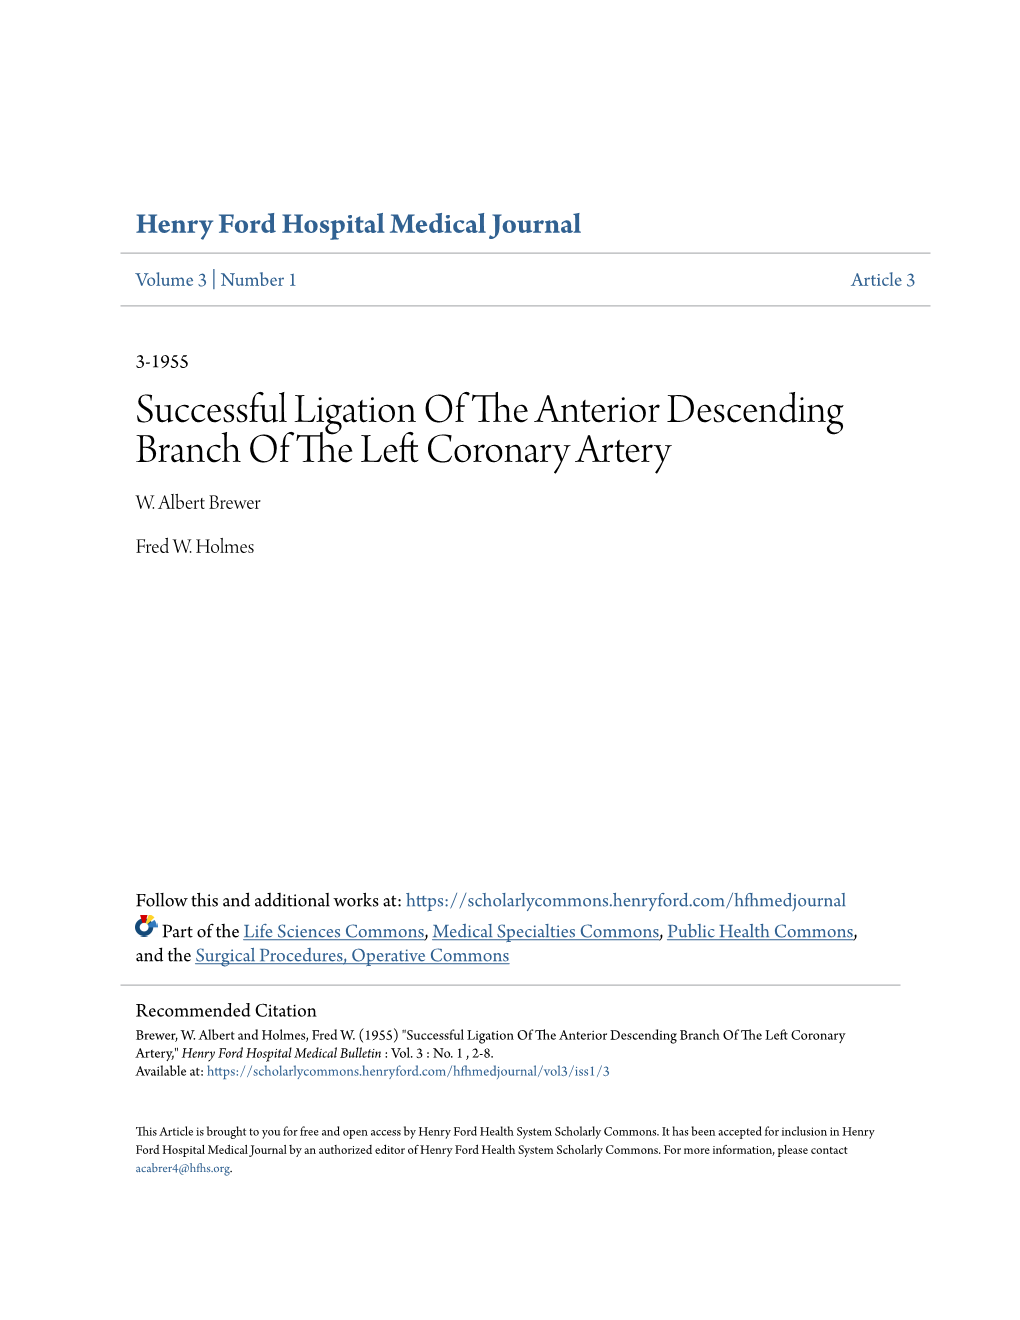 Successful Ligation of the Anterior Descending Branch of the Leftor C Onary Artery W